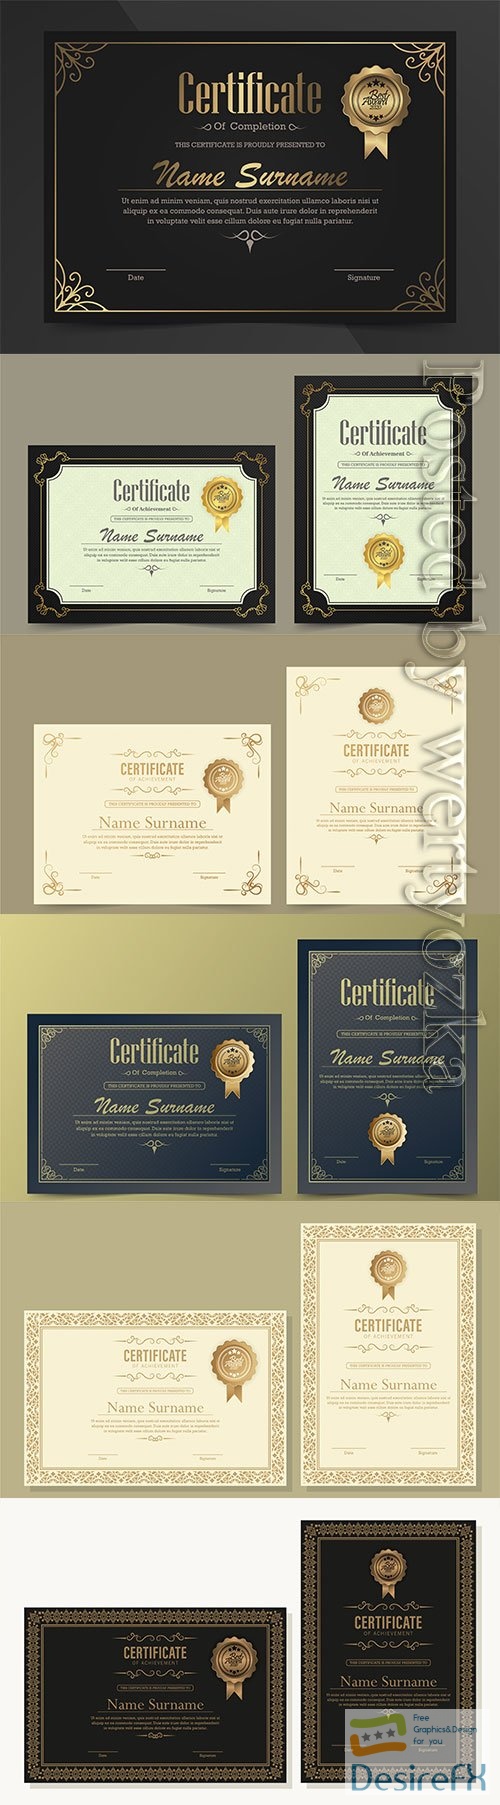 Achievement vector certificate template in vintage style